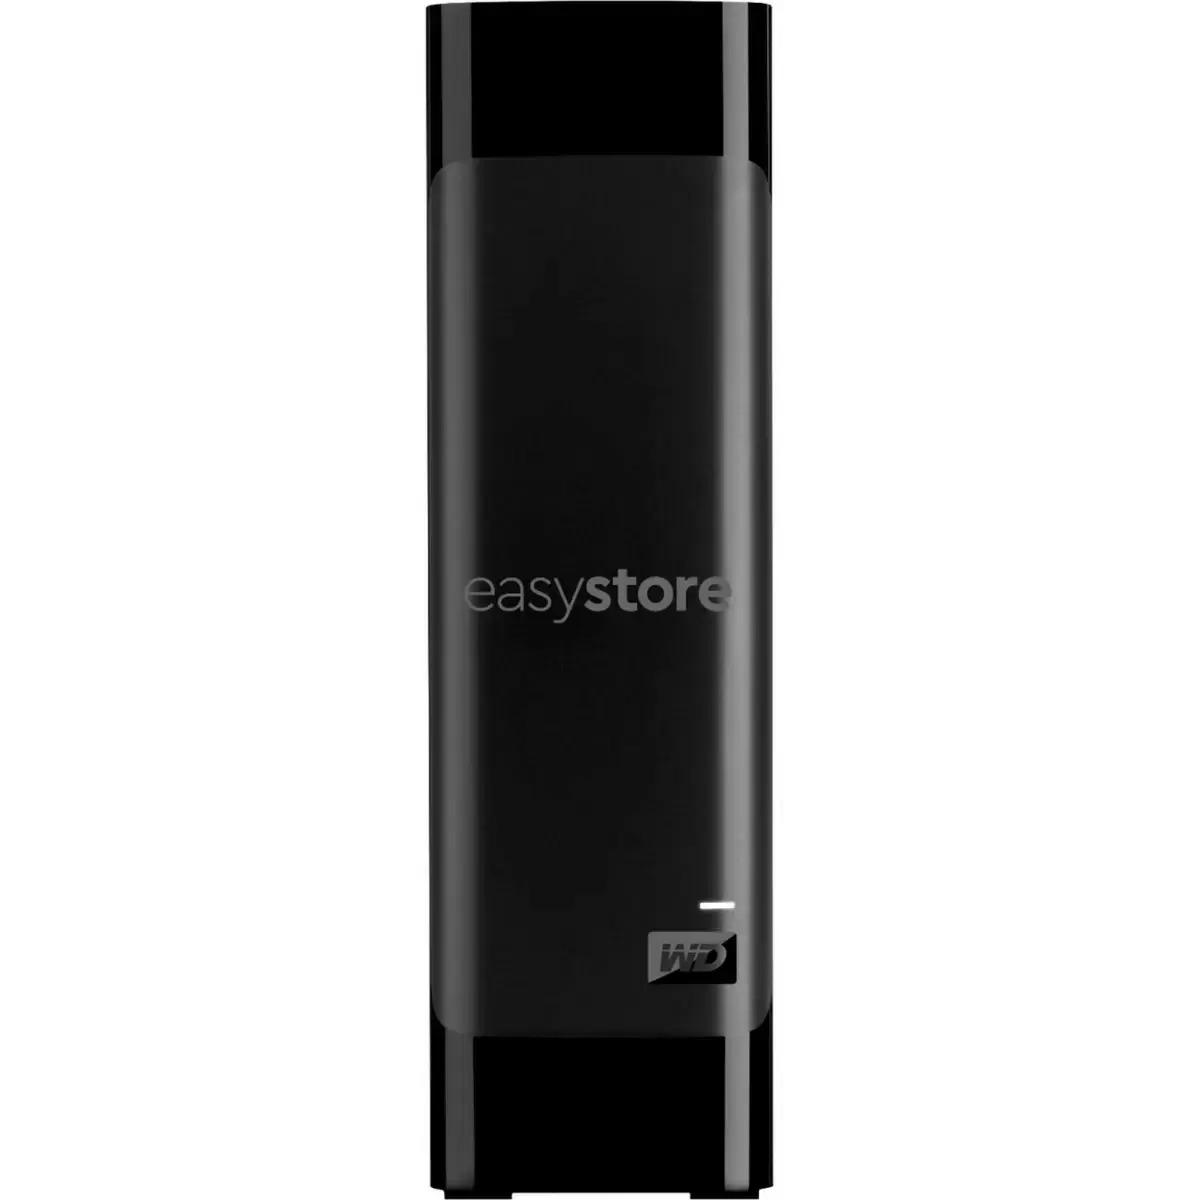 18TB WD easystore External USB 3.0 Hard Drive for $199.99 Shipped